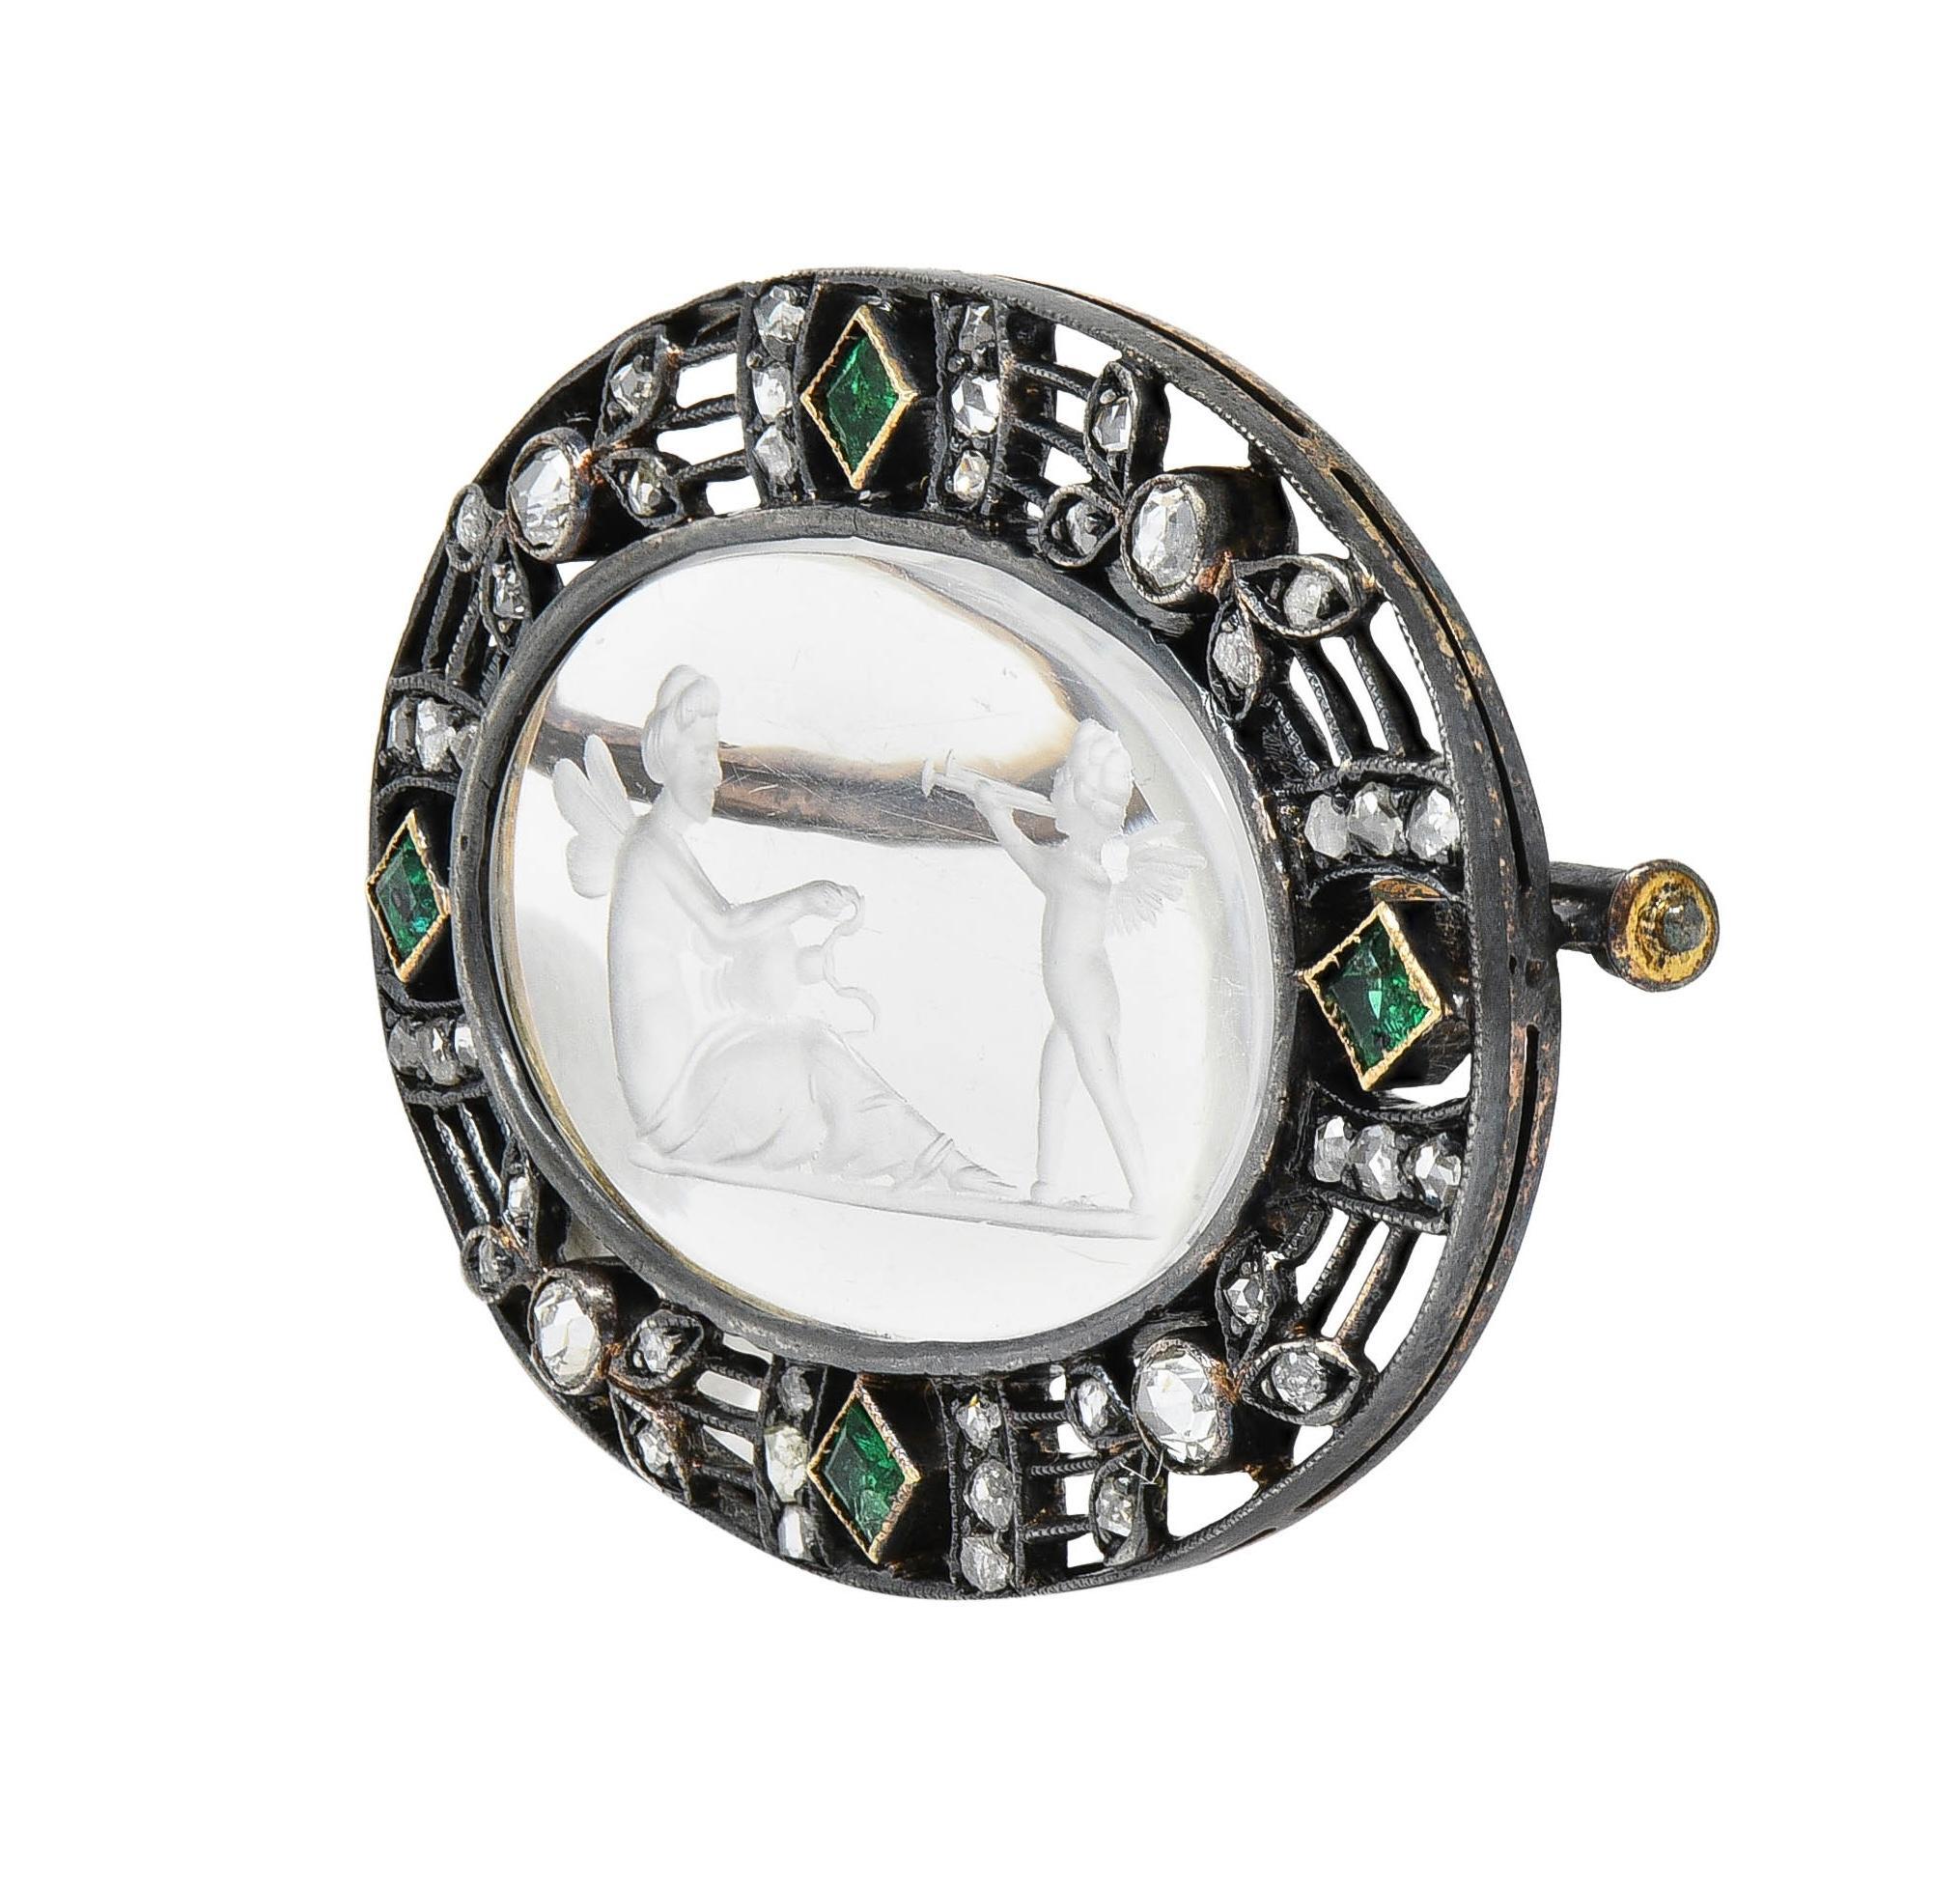 Centering an oval-shaped tablet of rock crystal quartz carved with an intaglio 
Transparent, glossy, and colorless - measuring 15.0 x 20.0 mm 
Depicting the Greek figures Cupid & Psyche with vase and trumpet
Bezel set with a pierced silver-topped